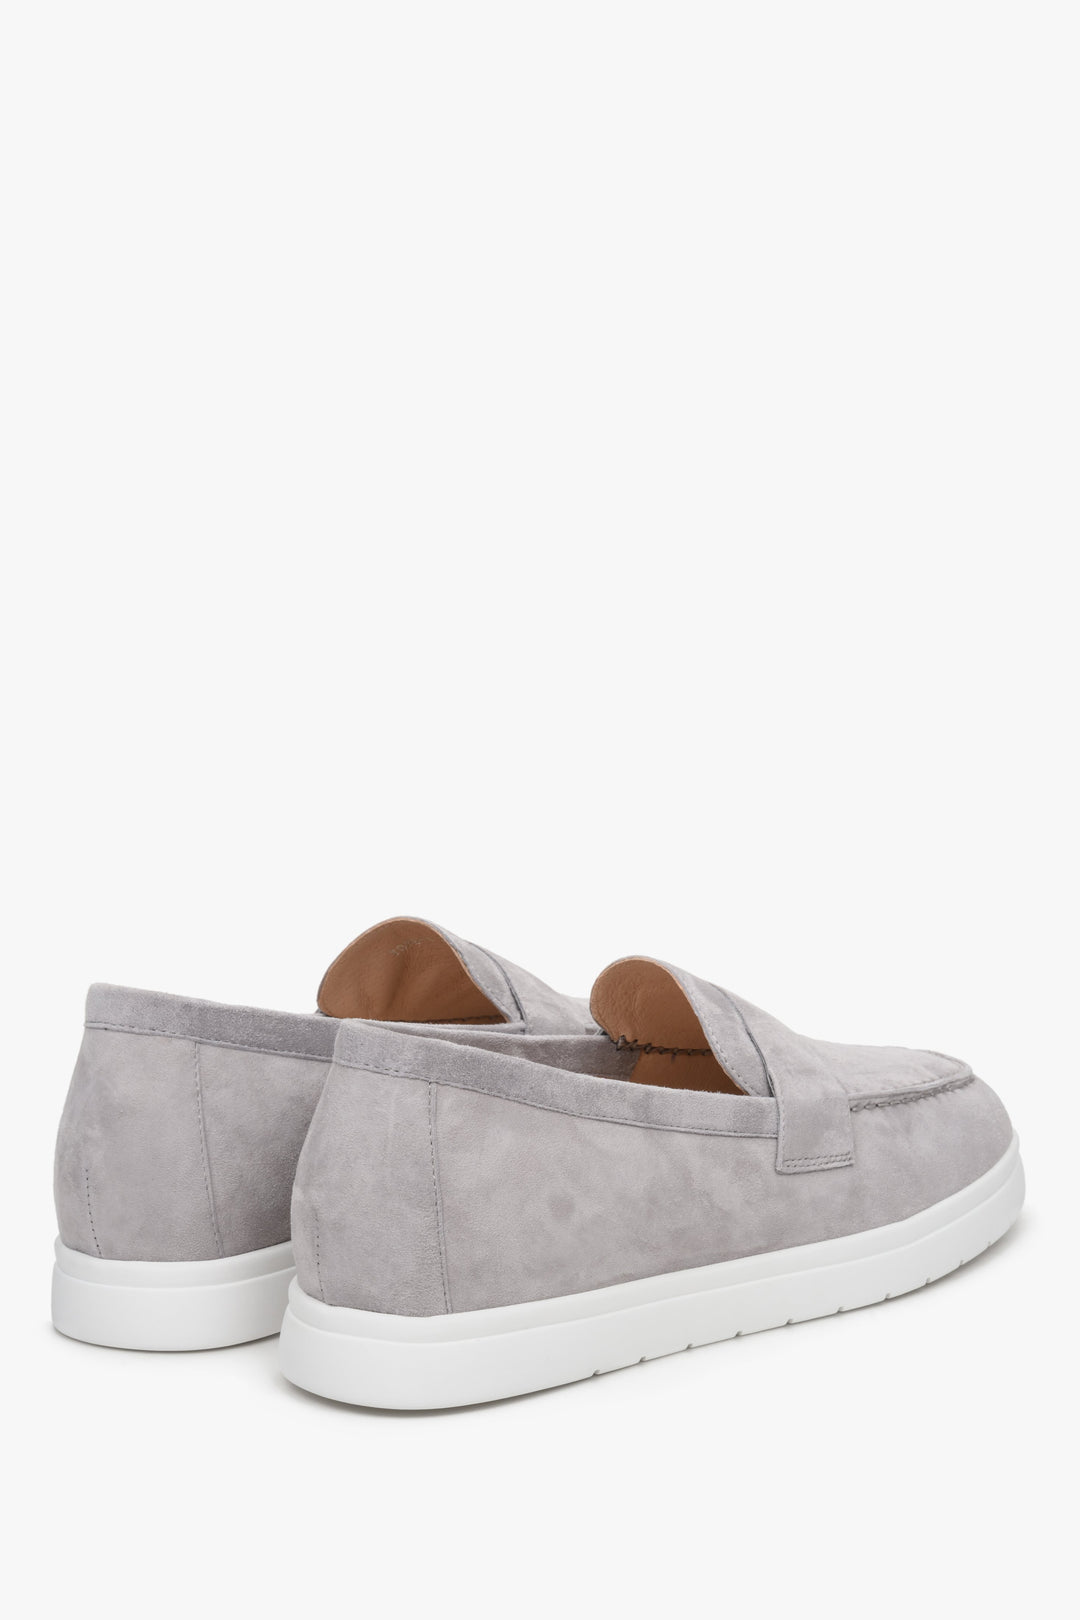 Women's Estro velour moccasins for fall in grey - presentation of the heel and side vamp.